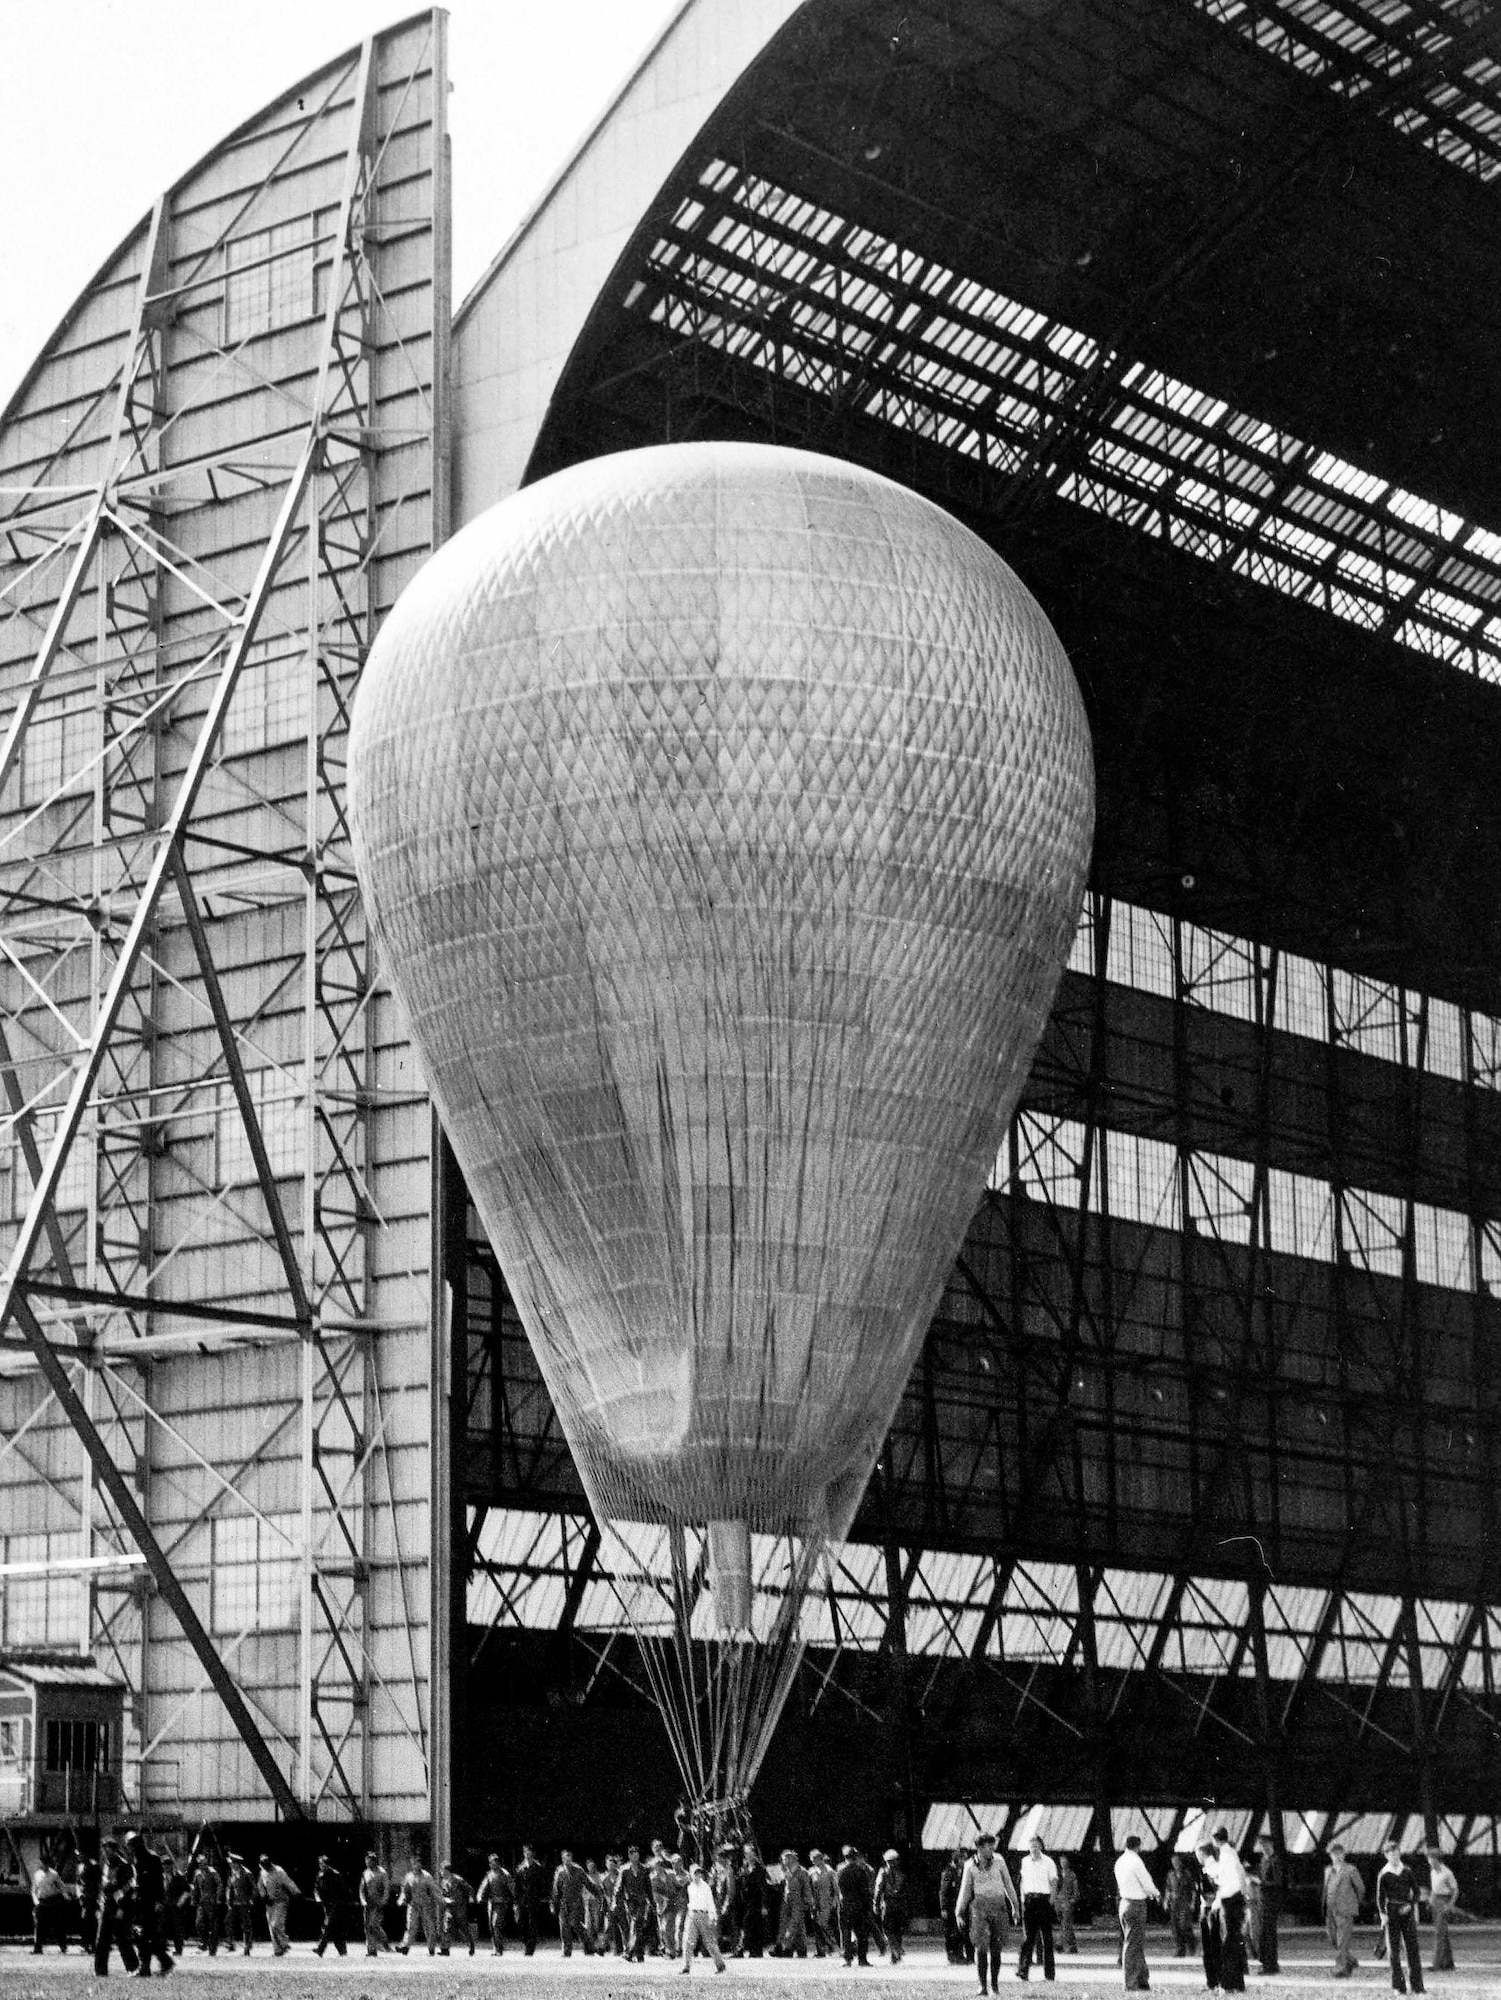 Pictured is the Goodyear Zeppelin Corporation’s three million cubic foot balloon, which was the largest balloon ever made. Maj. William Kepner was appointed to pilot the craft. Capt. Albert Stevens and Capt. Orvil Anderson accompanied him as the alternate pilot and organizer of the expedition camp dubbed the “Stratobowl.”